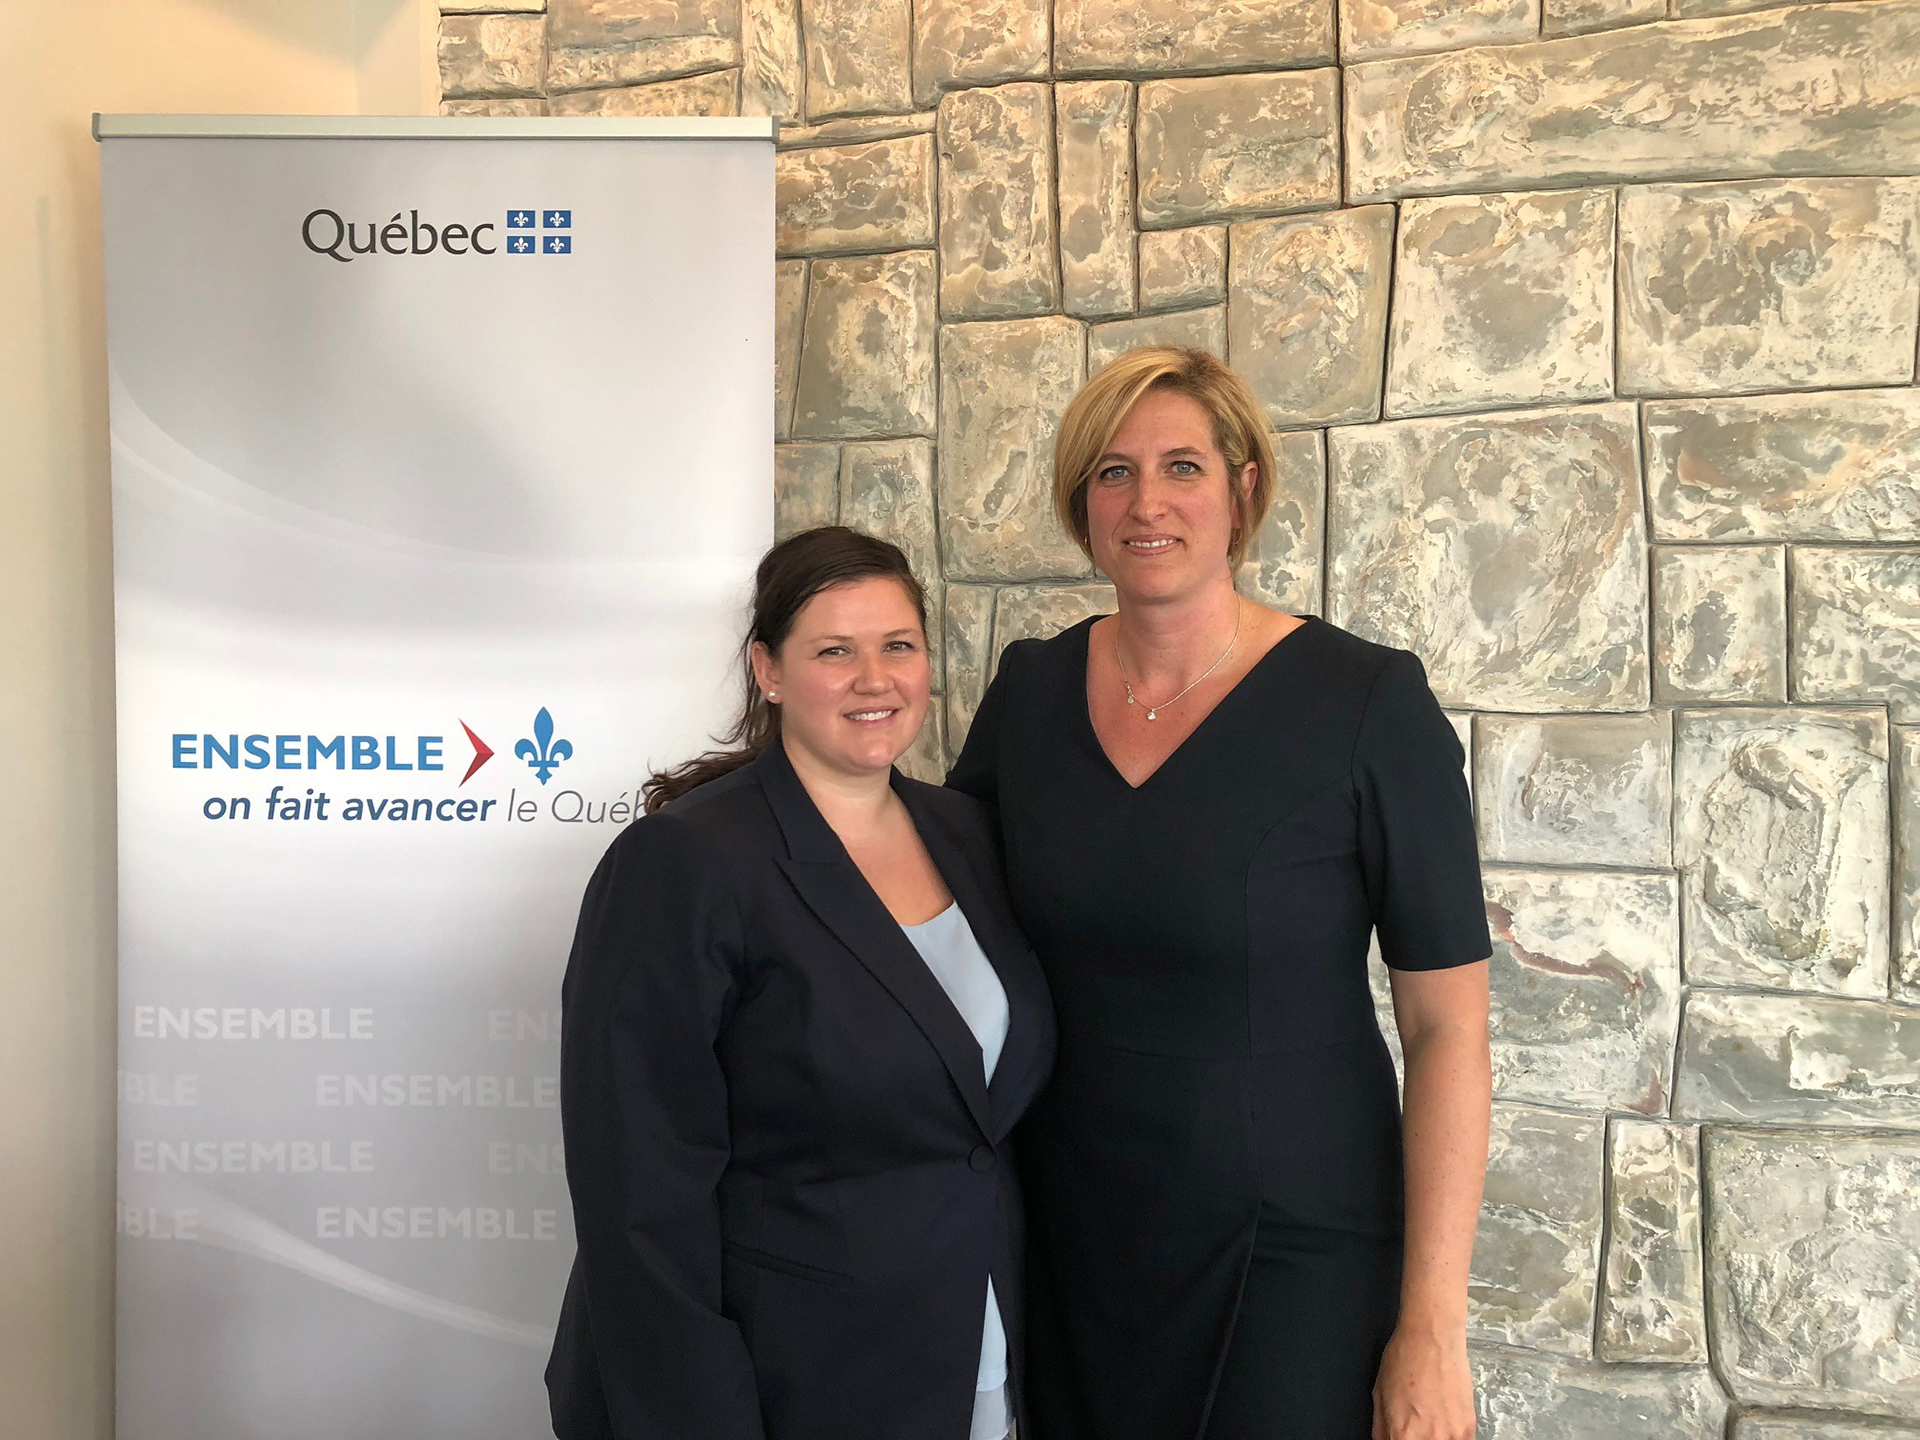 Dr. Krista Goulding, orthopedic surgical oncologist at the MUHC, and Dr. Sophie Mottard, responsible for the Quebec Sarcoma network and orthopedic surgeon at Maisonneuve-Rosemont Hospital.